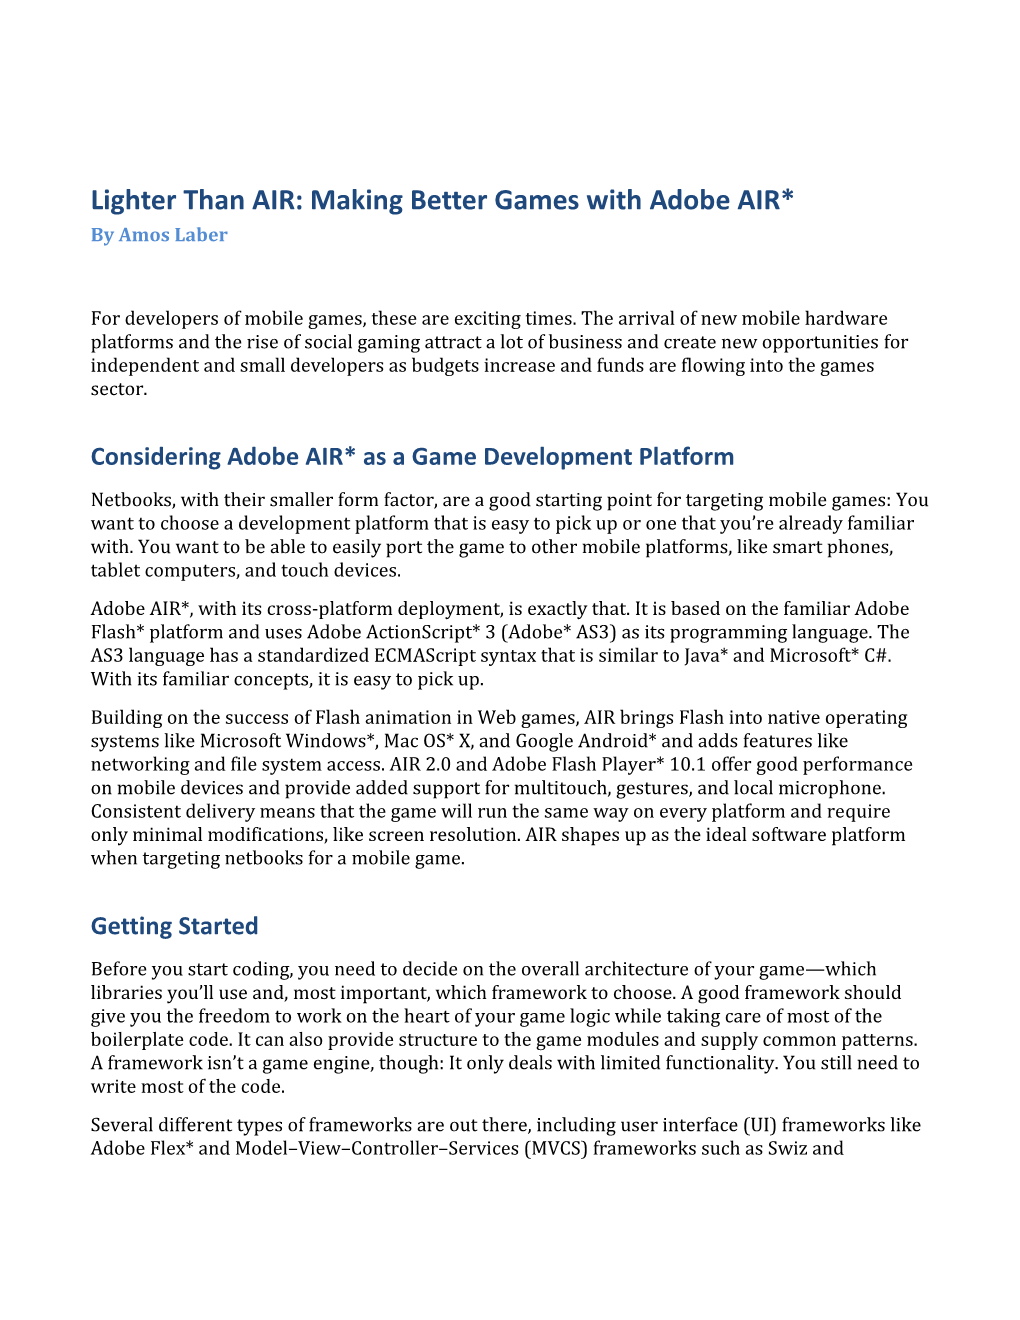 Lighter Than AIR: Making Better Games with Adobe AIR* by Amos Laber